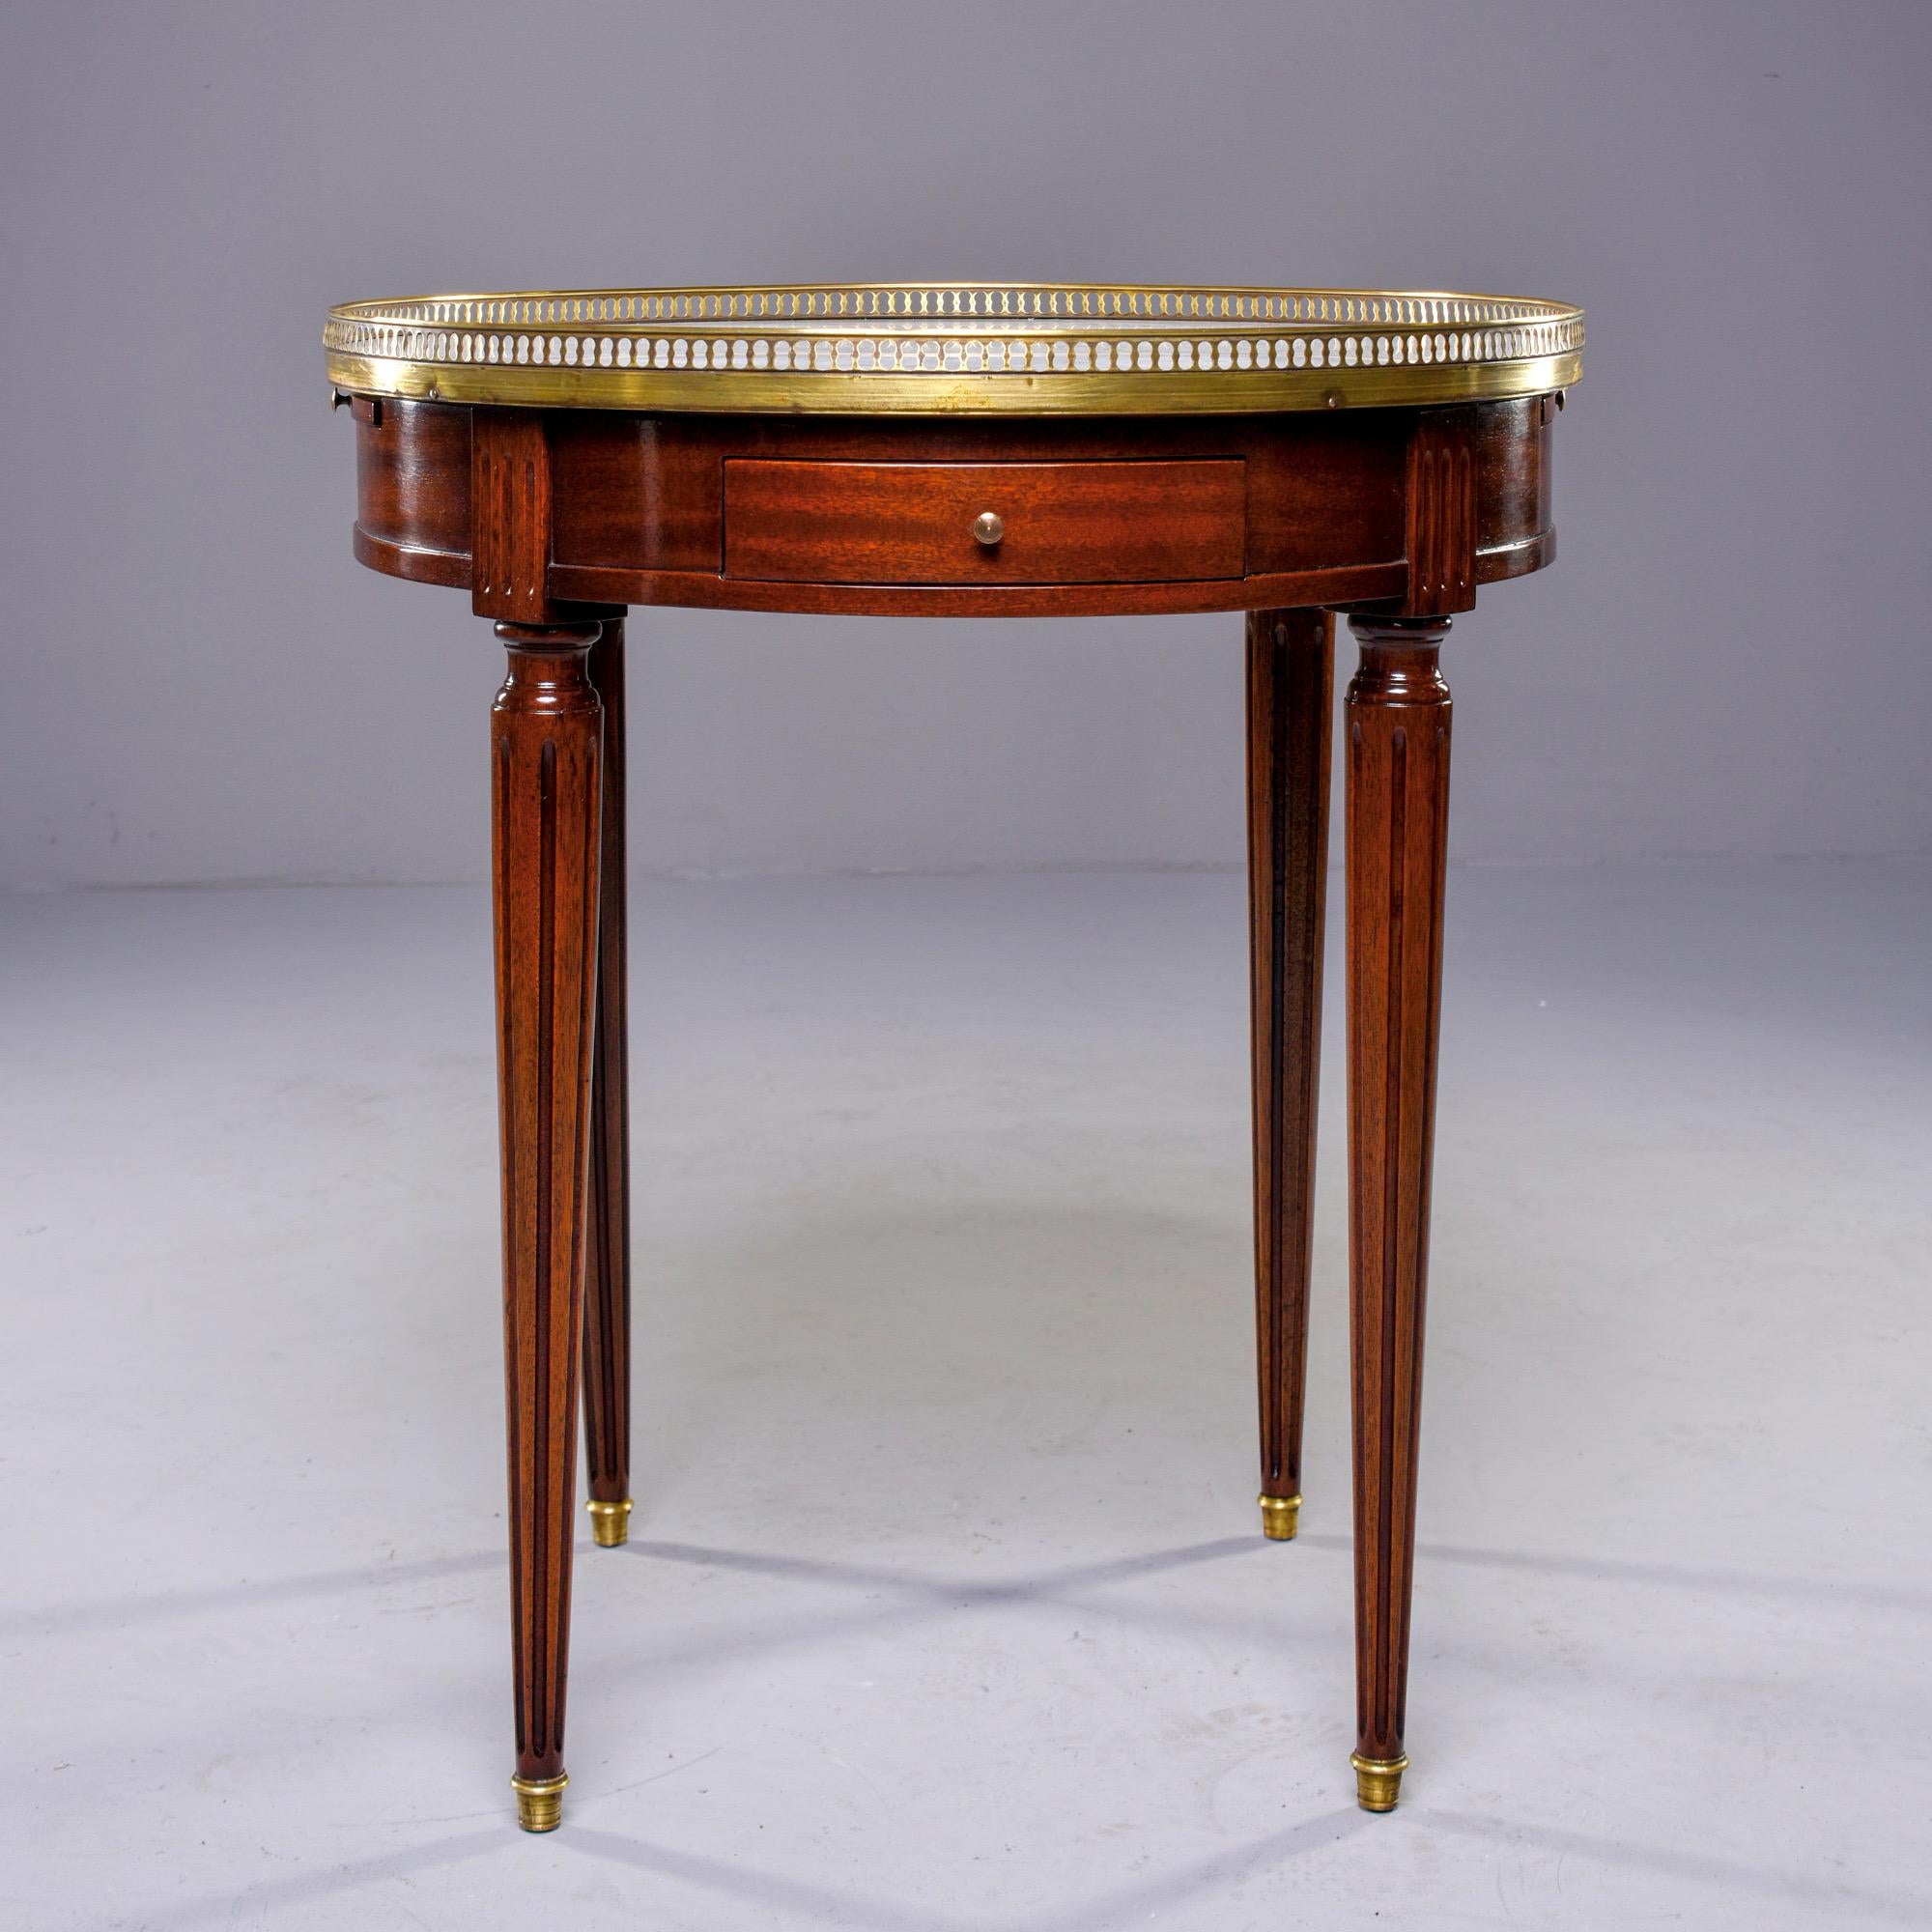 Circa 1900 French Louis XVI style Guéridon features a mahogany base with tapered, reeded and brass capped legs, a round white marble top with brass gallery and small drawer. Sides have leather covered extensions. Unknown maker. Classic and versatile